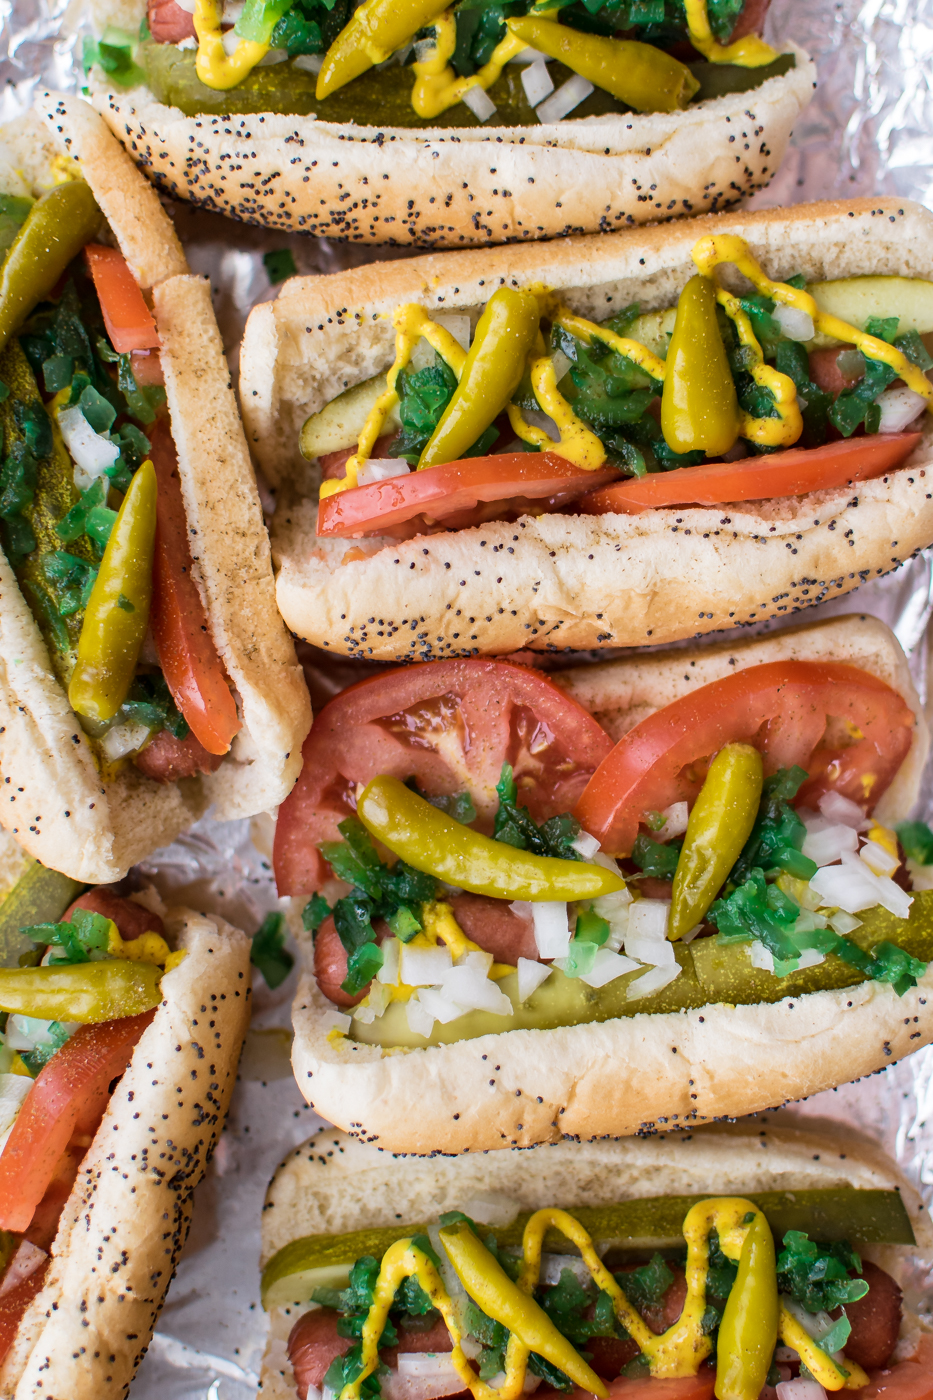 chicago style hot dogs by Carolyn's Cooking